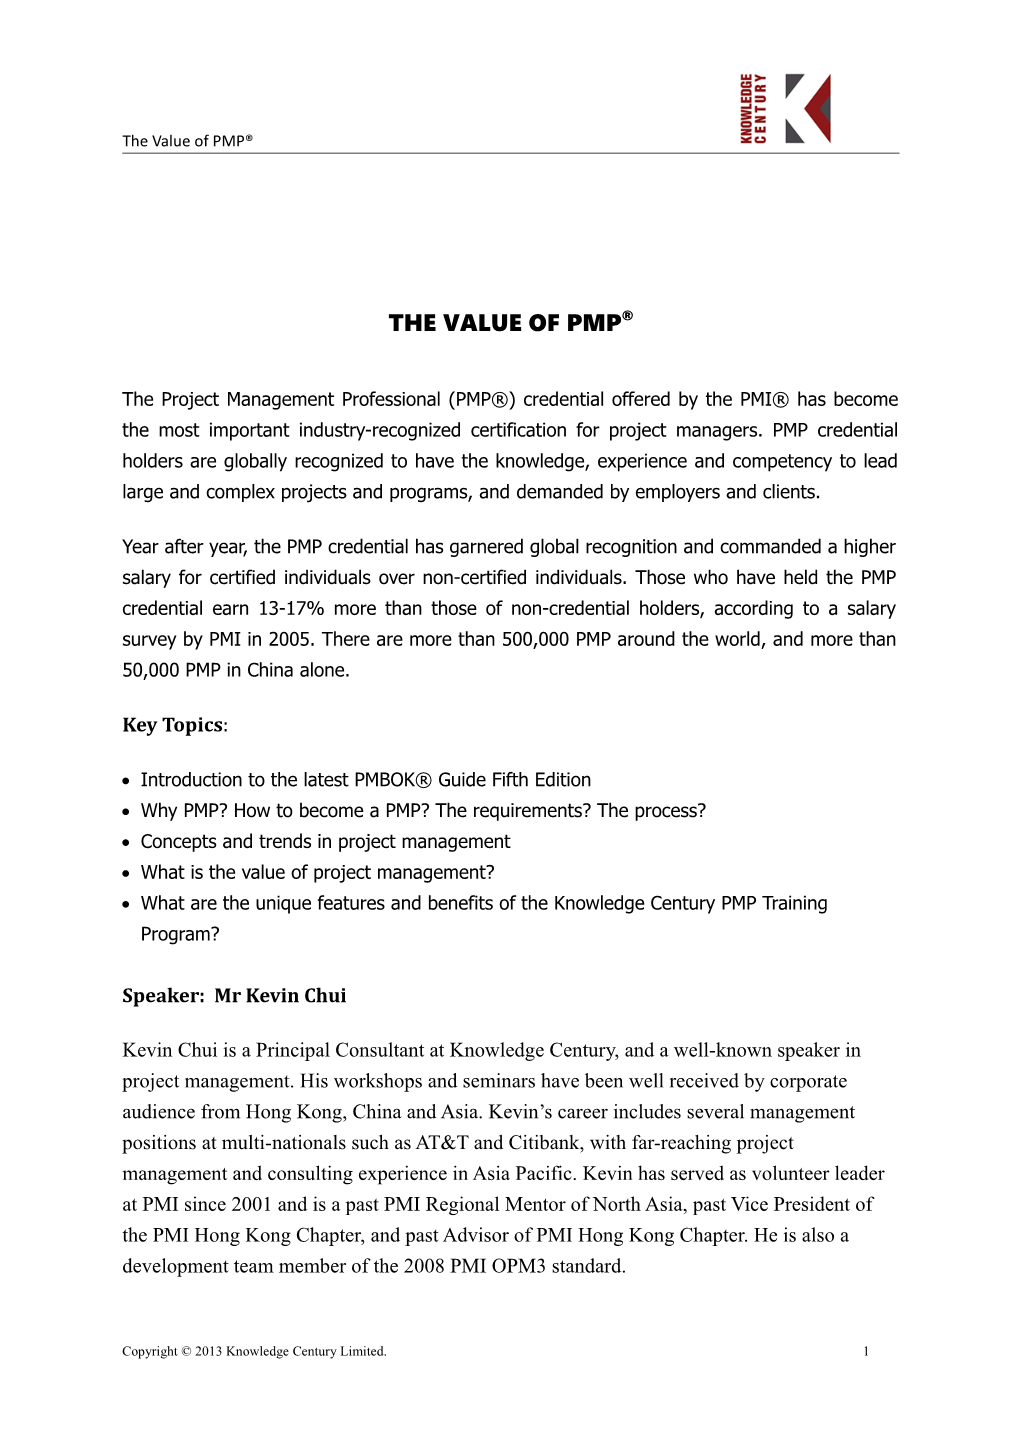 The Value of PMP